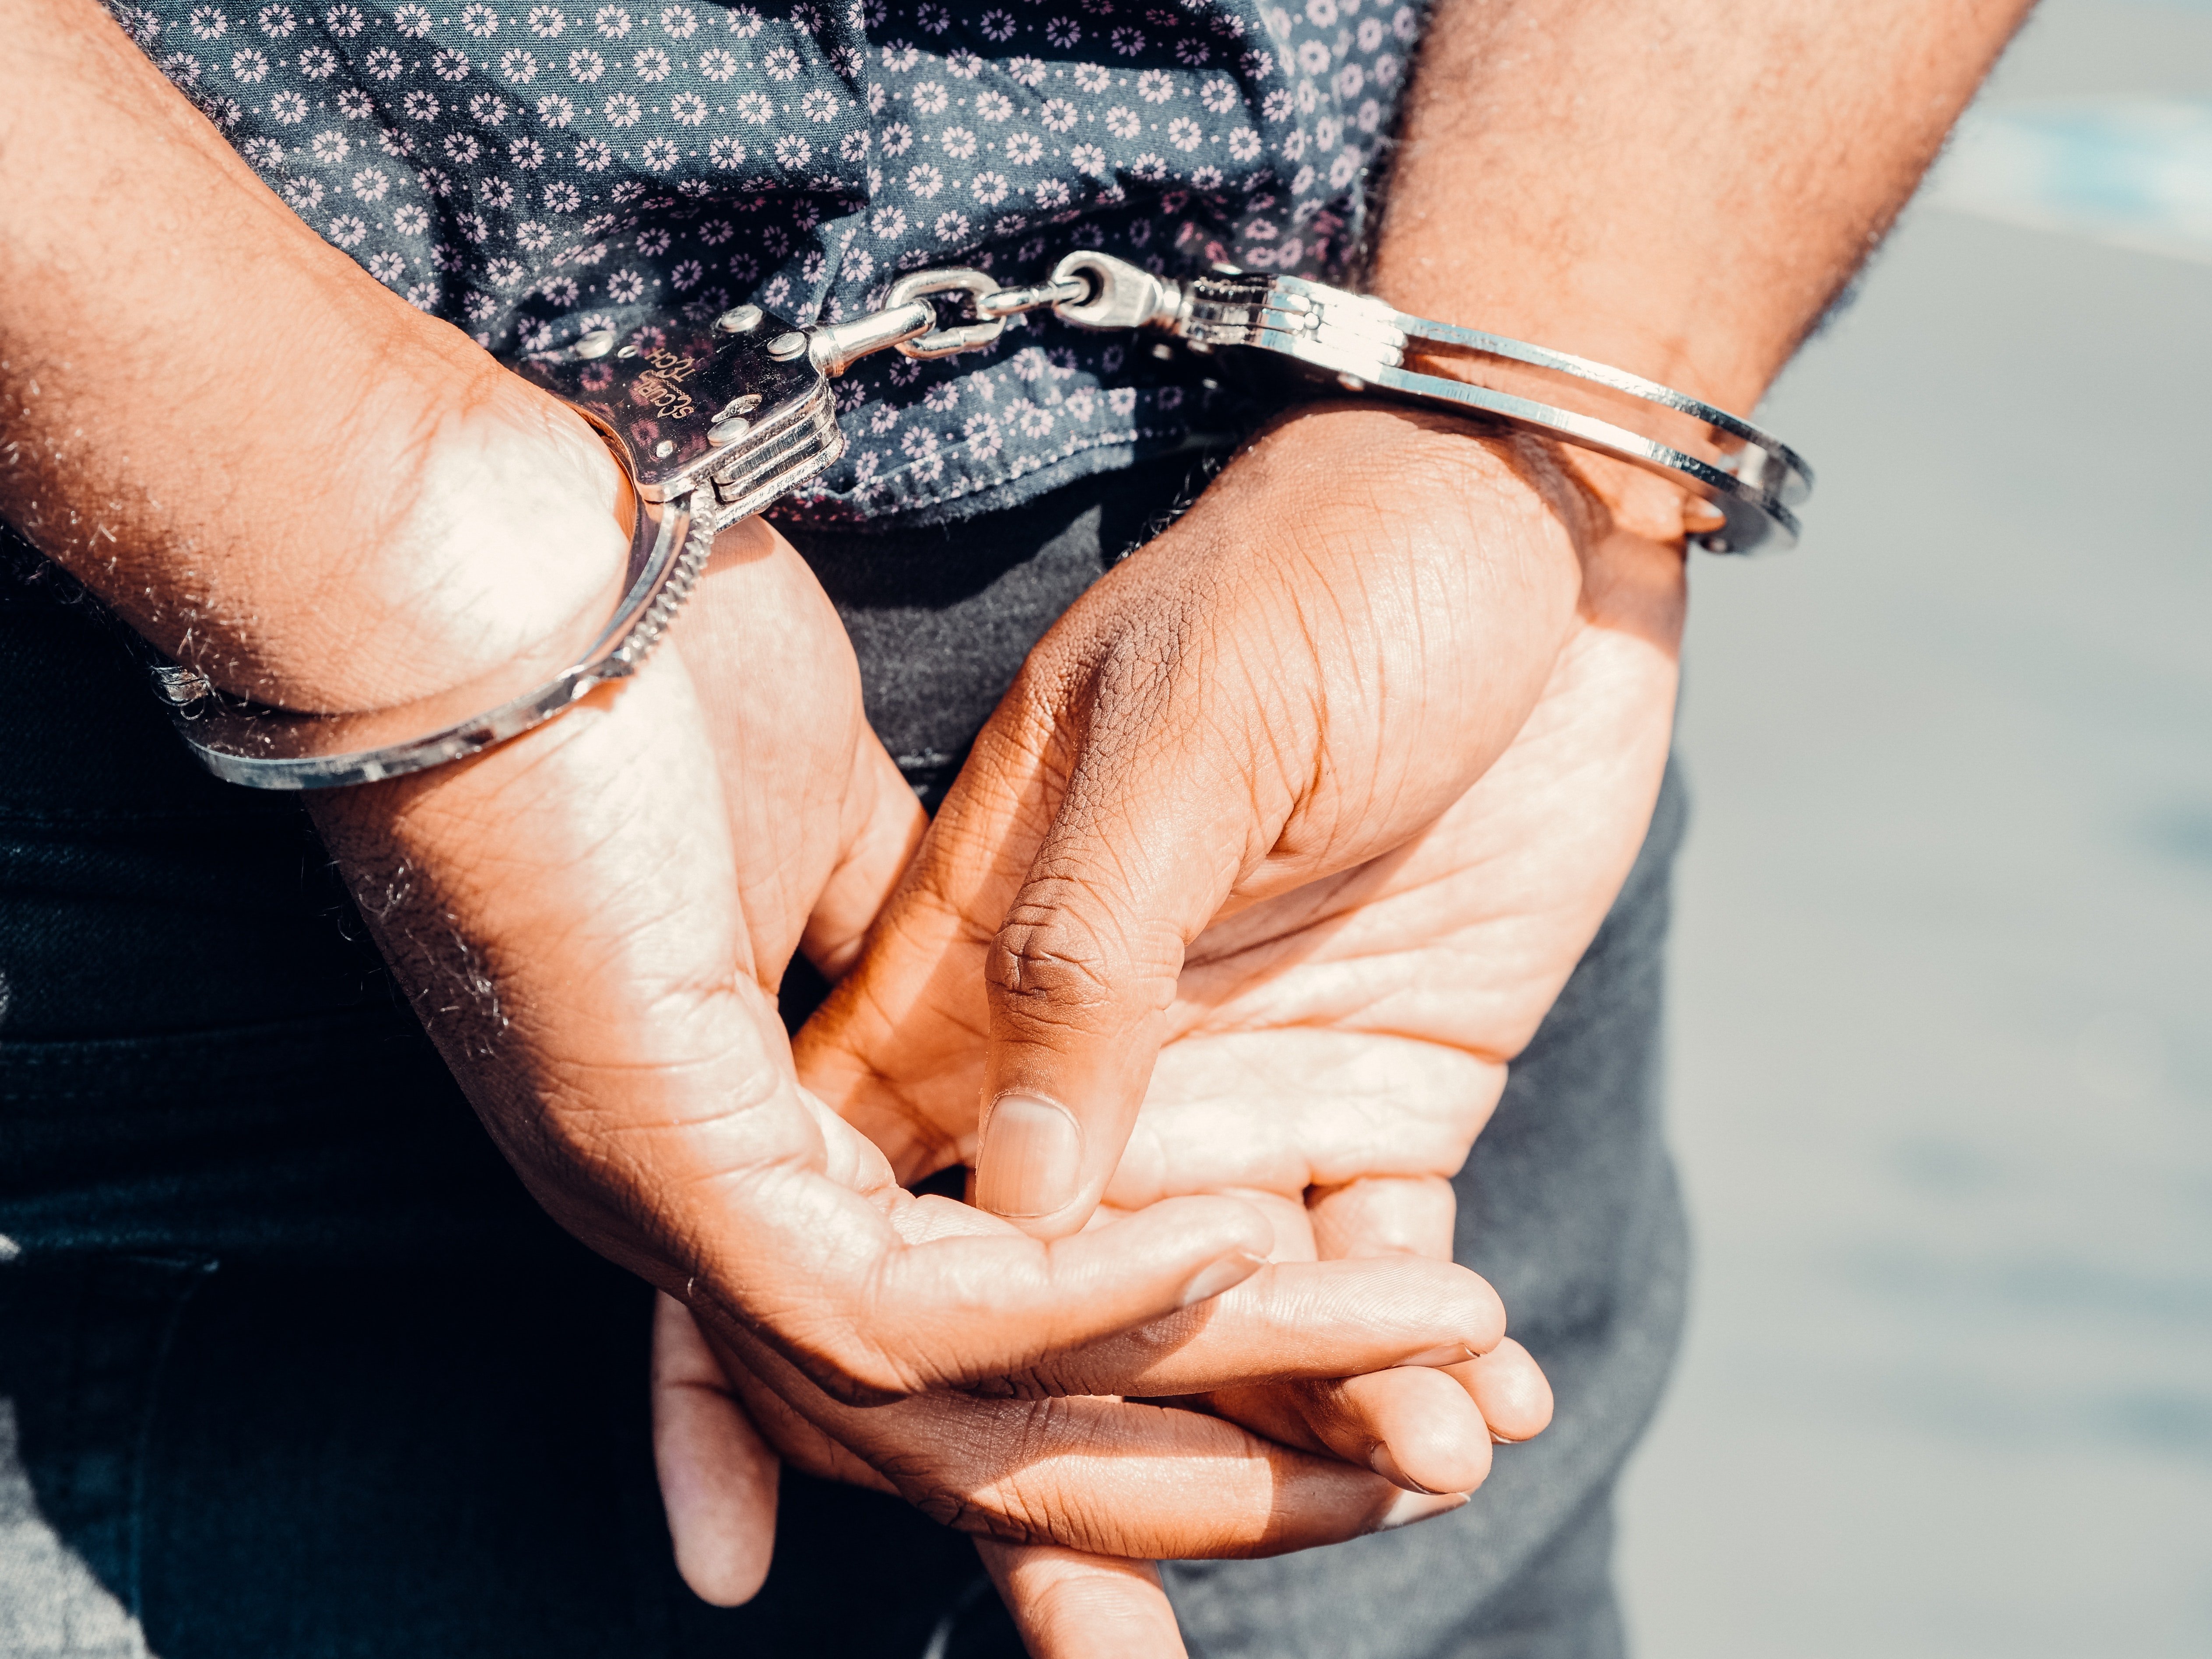 Pictured - A photo of a man in handcuffs wearing jeans and a floral shirt | Source: Pexels 